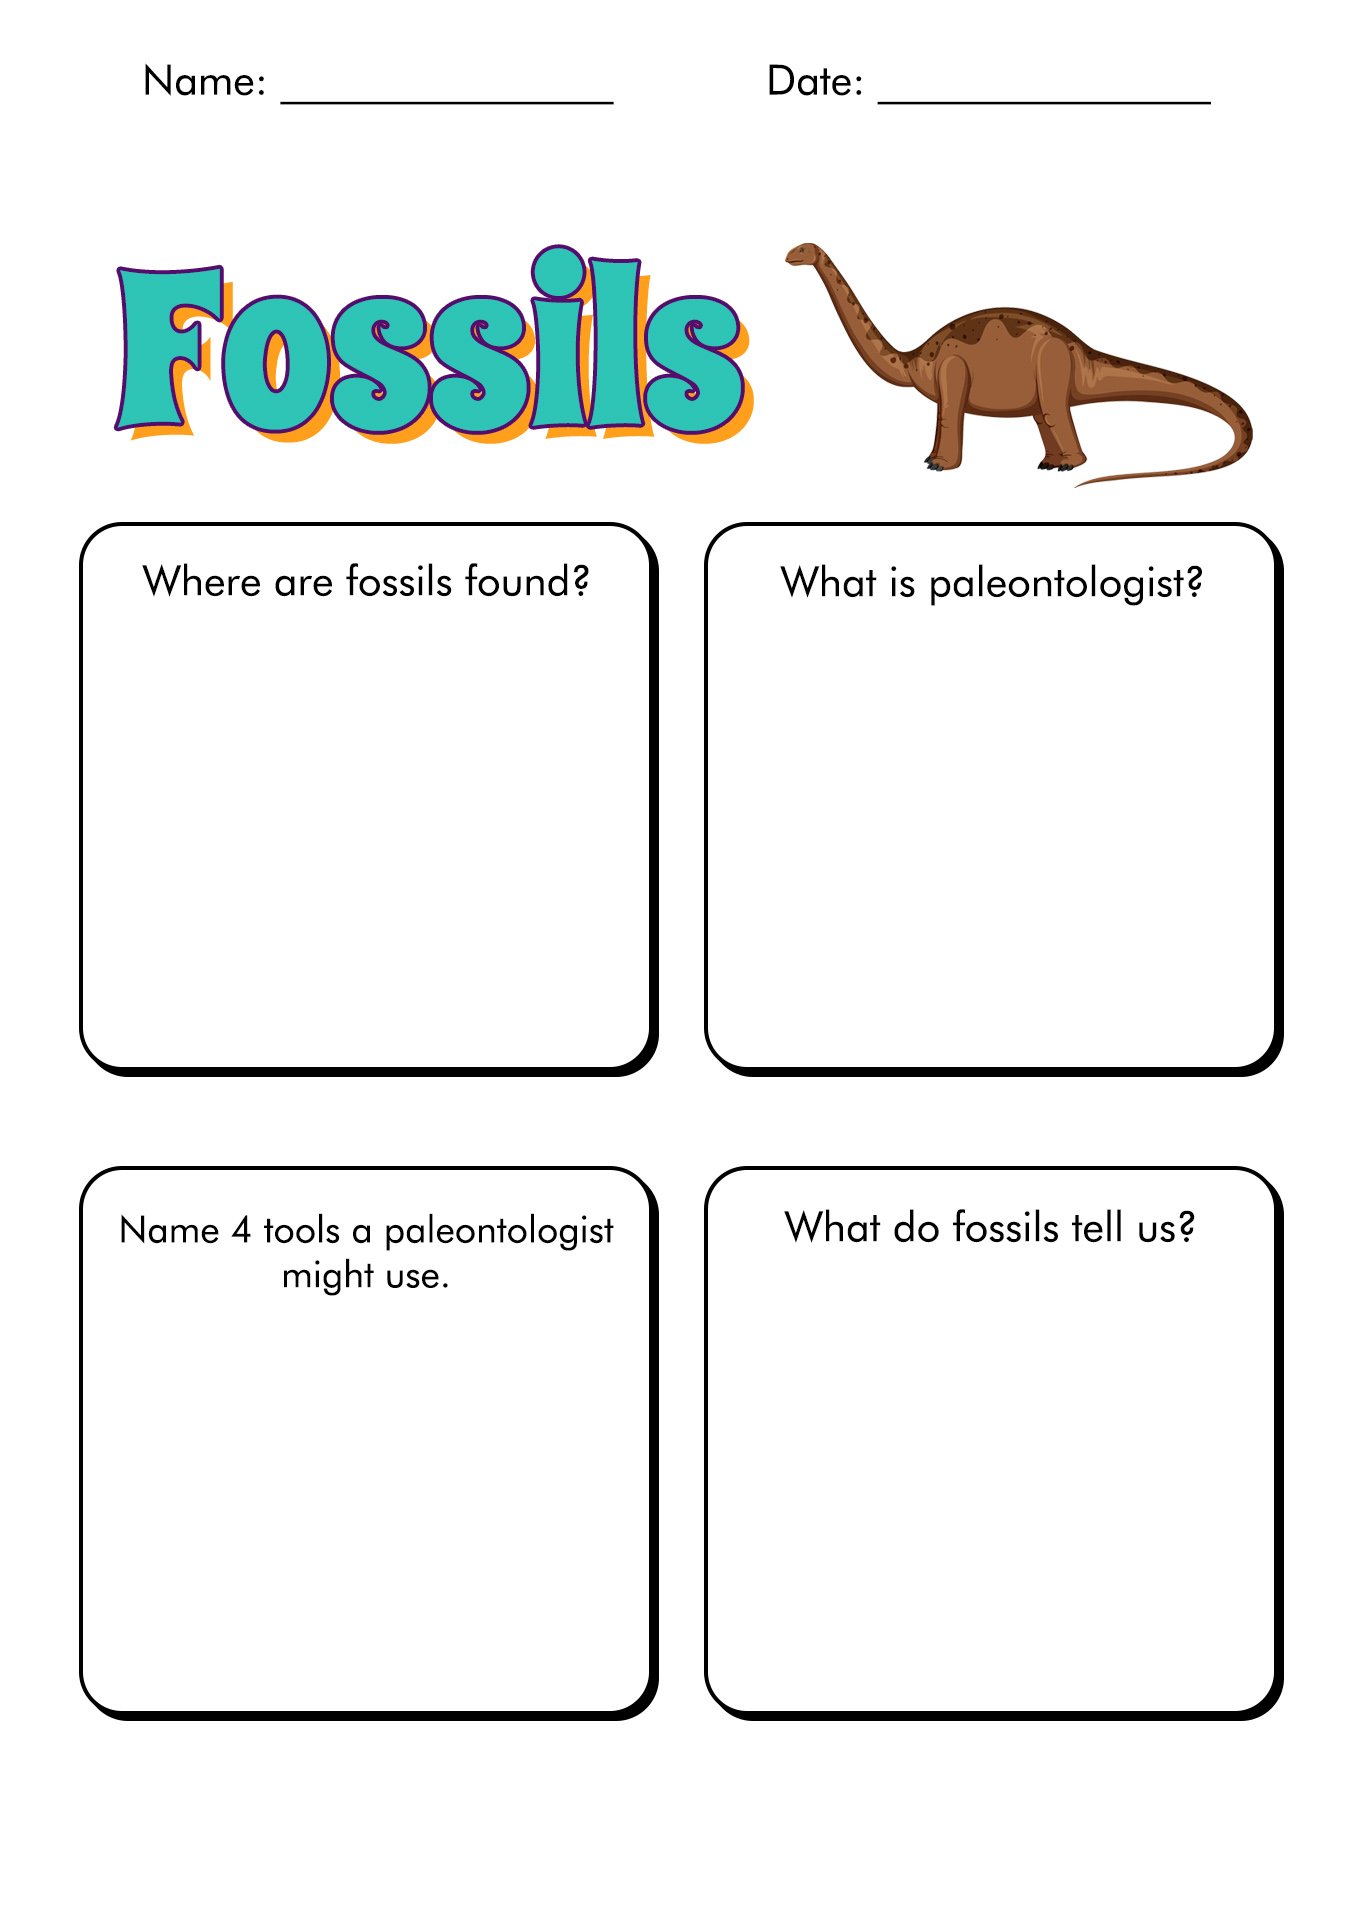 11-best-images-of-fossils-activities-worksheets-fossil-activity